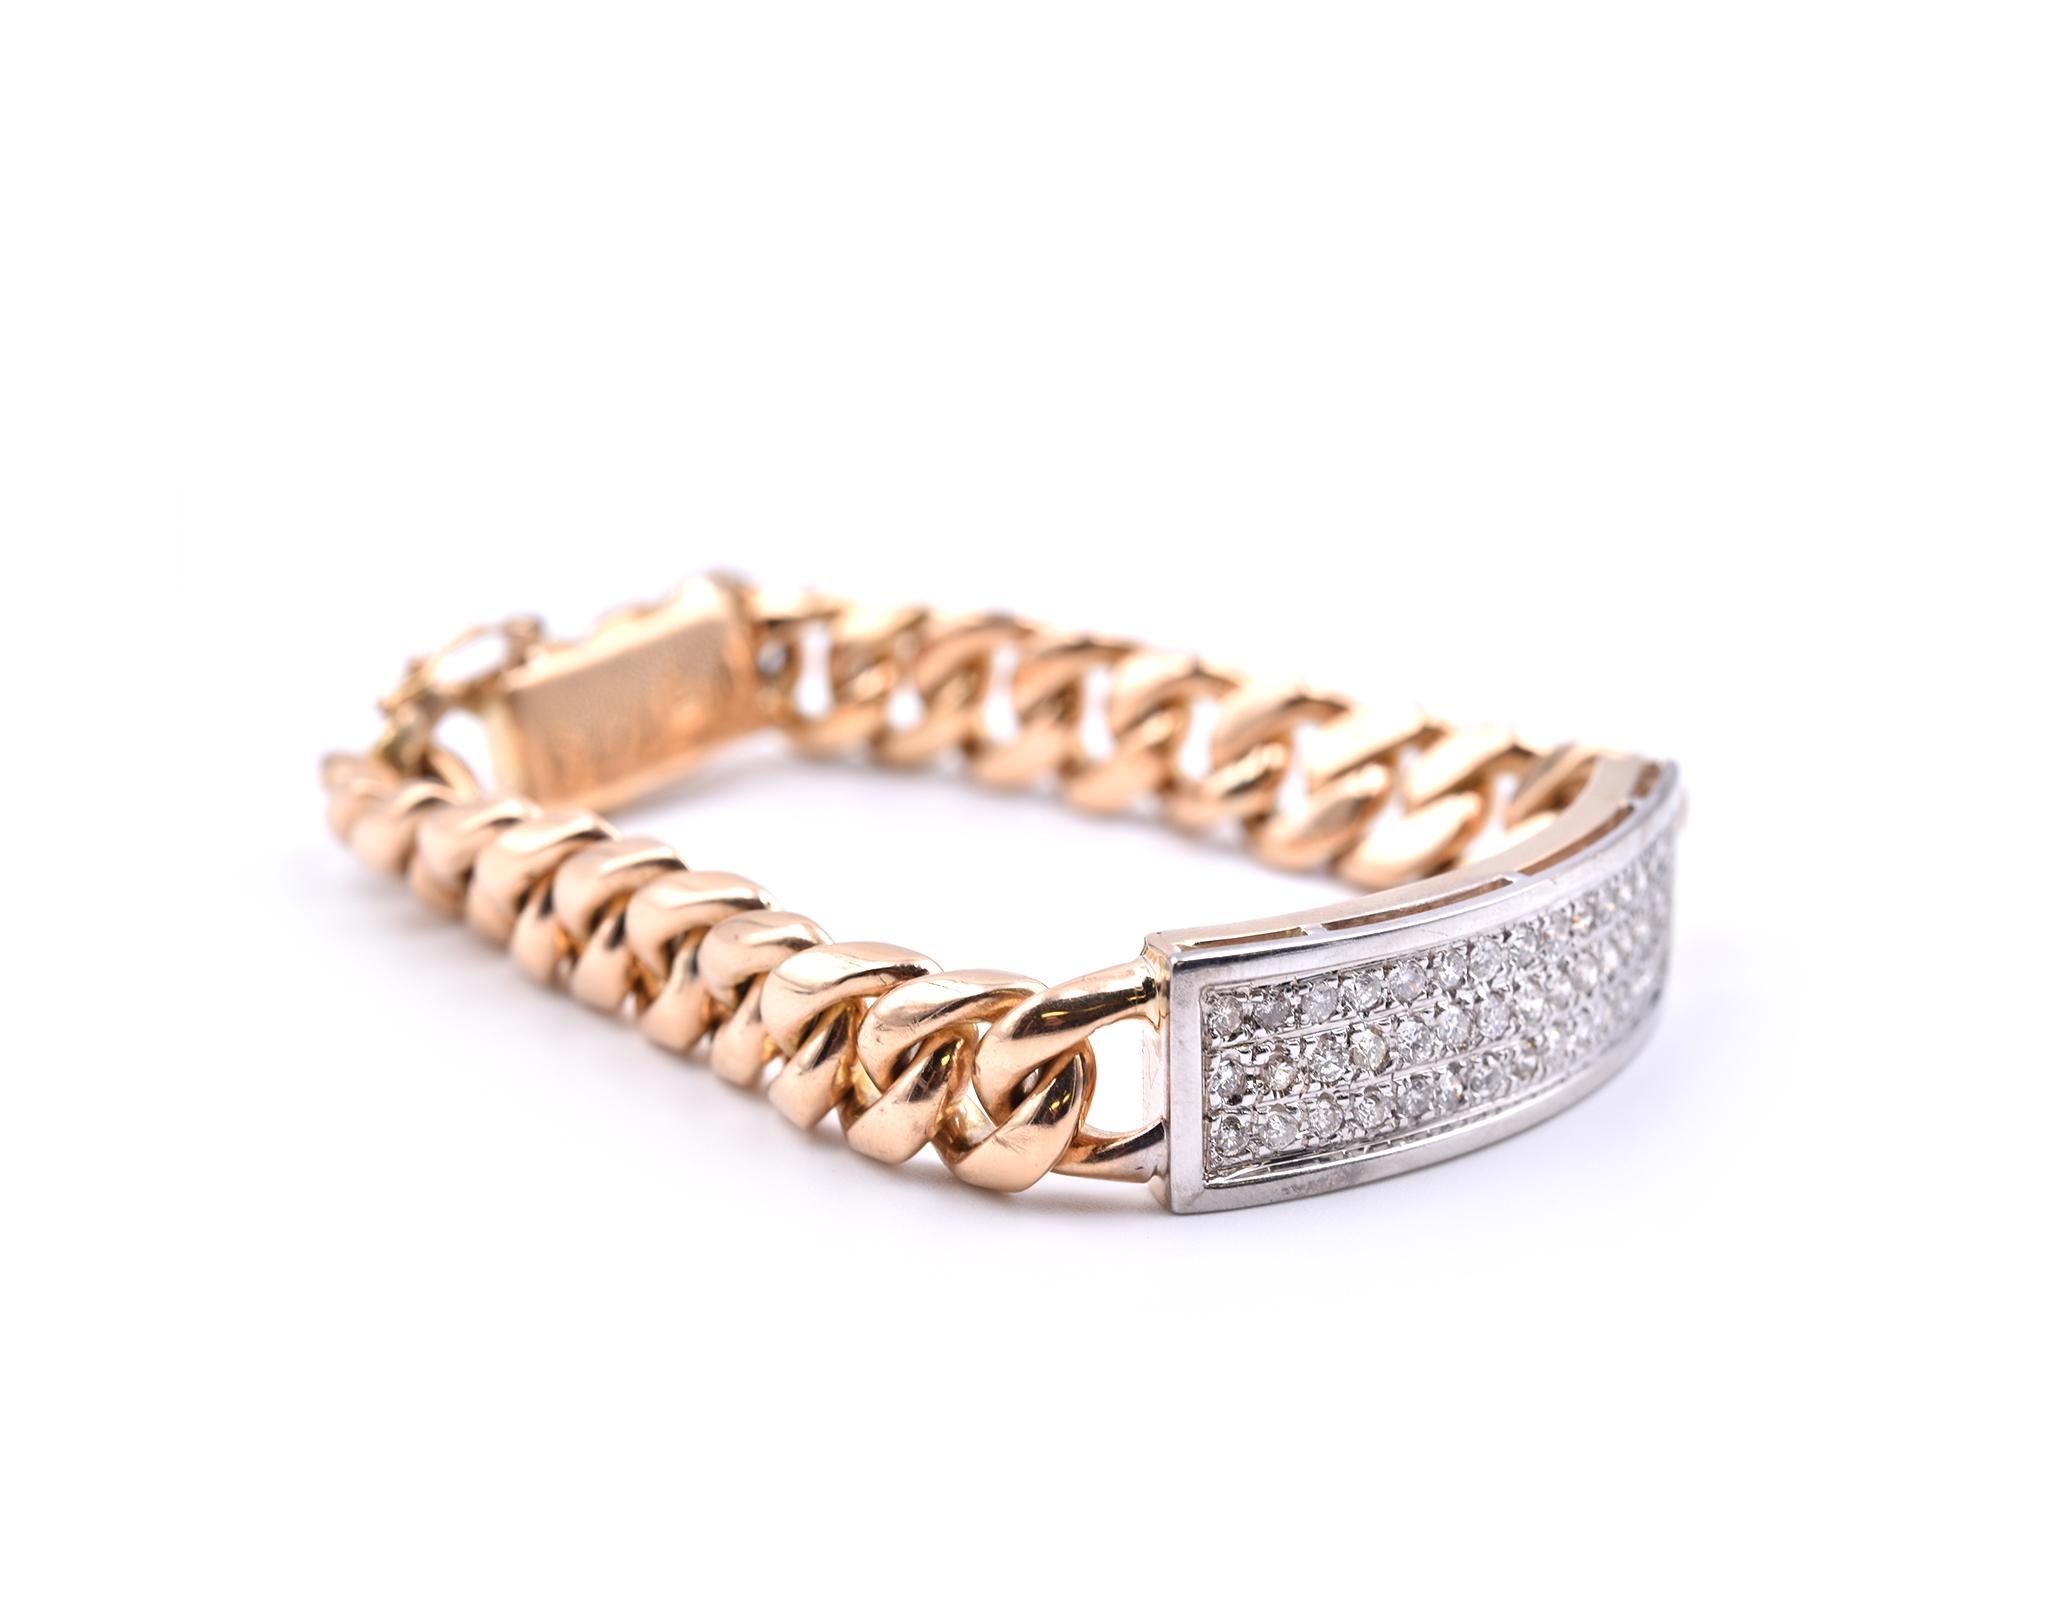 Designer: custom design
Material: 18k yellow gold
Diamonds: 42 round single cut = 1.26 carat total weight
Dimensions: bracelet measures 7 1/2-inches long and 1/2-inches long
Weight: 57.55 grams
